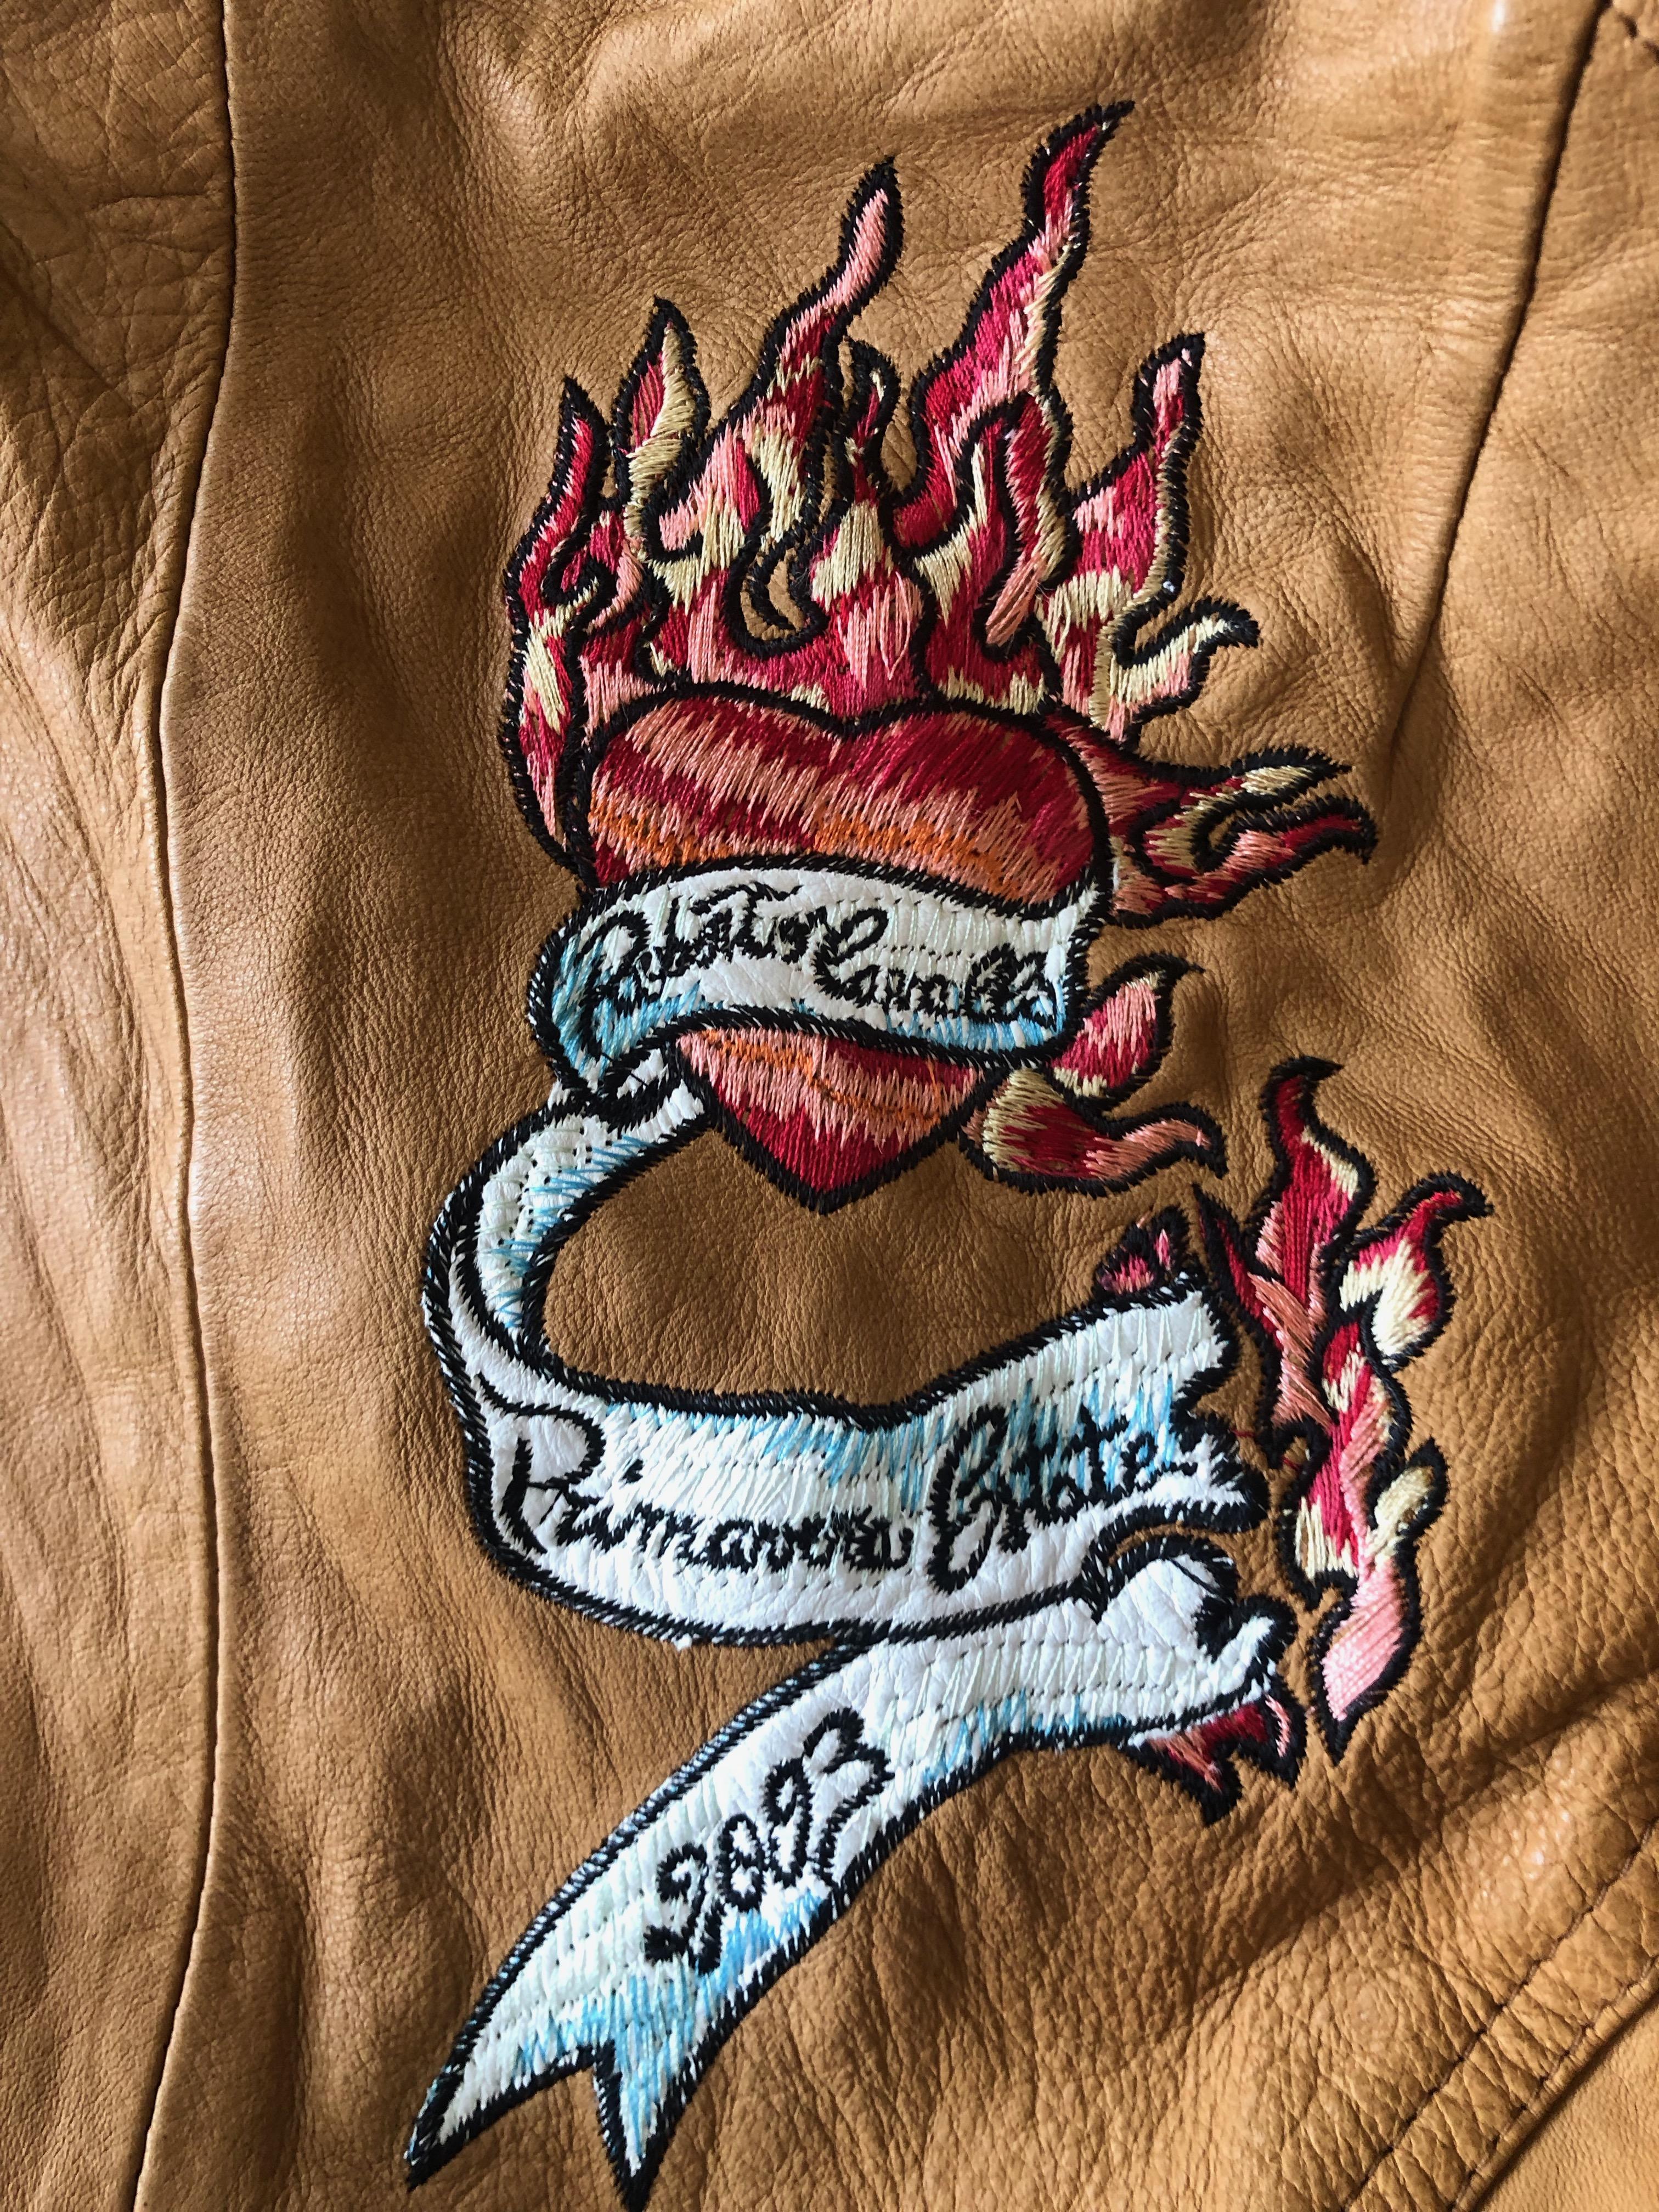 Roberto Cavalli Collectable Leather Jacket with Tattoo Embroidery 
Please use the zoom feature to see all the great details.
From 2003, this is much less distressed than many of these from this era, but it is intended to look old.
No size tag, size